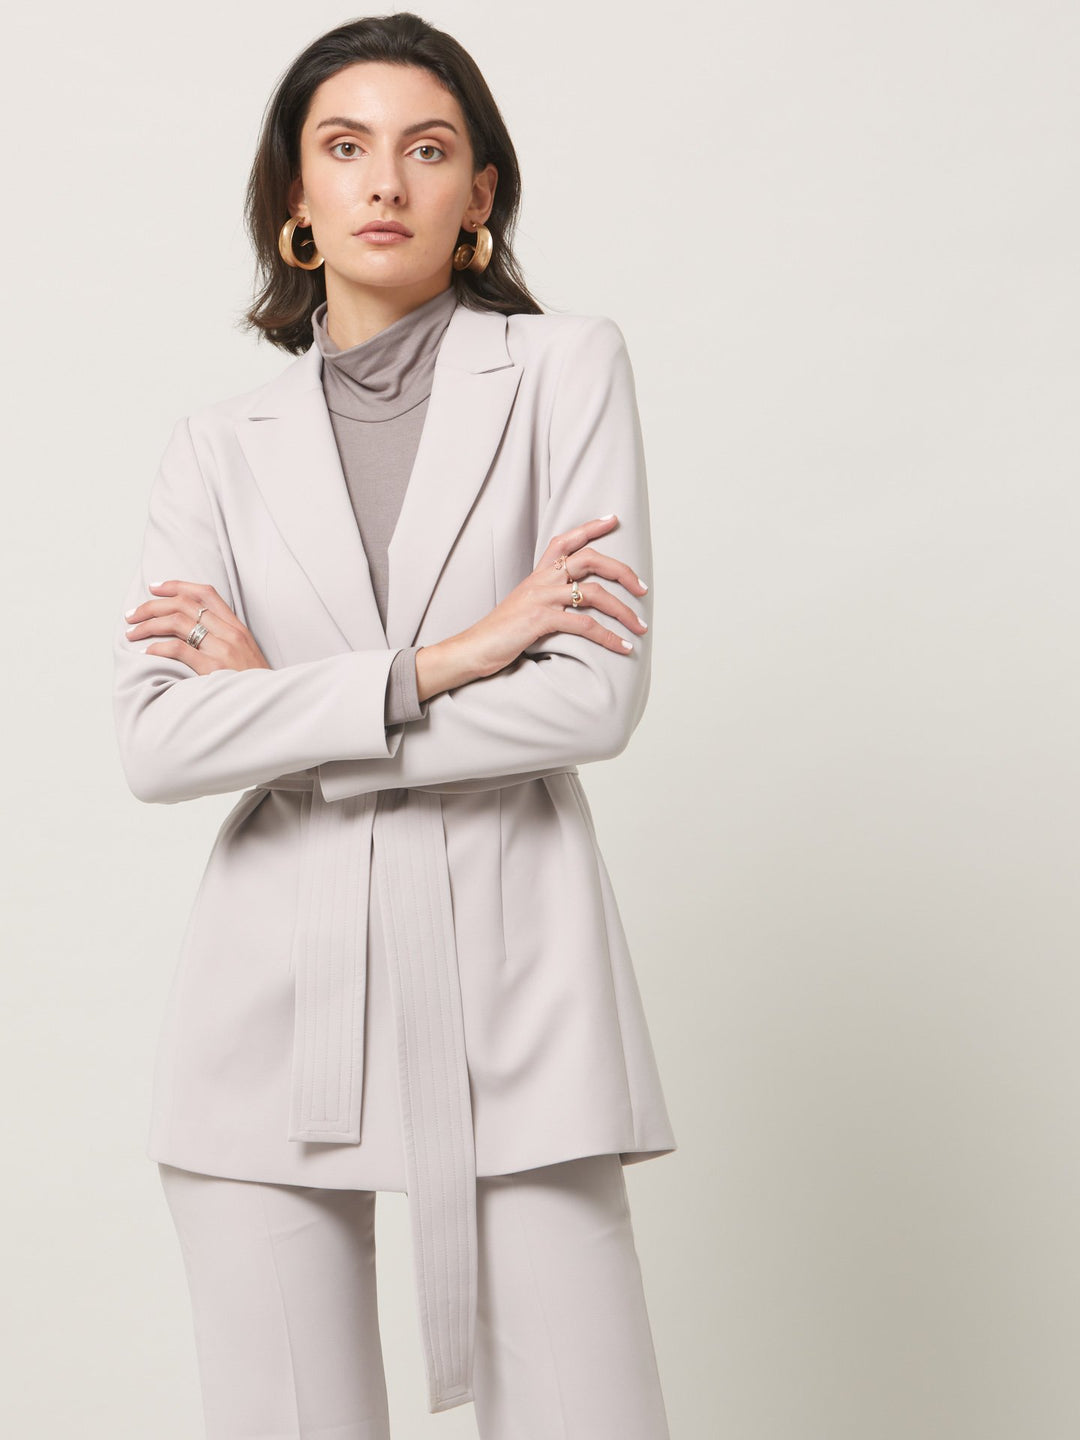 A signature hmca piece. our perennial best-seller. This versatile top features a flattering mesh yoke and sleeves on a snug jersey body. Perfect underpinning to suiting or a more casual pant.